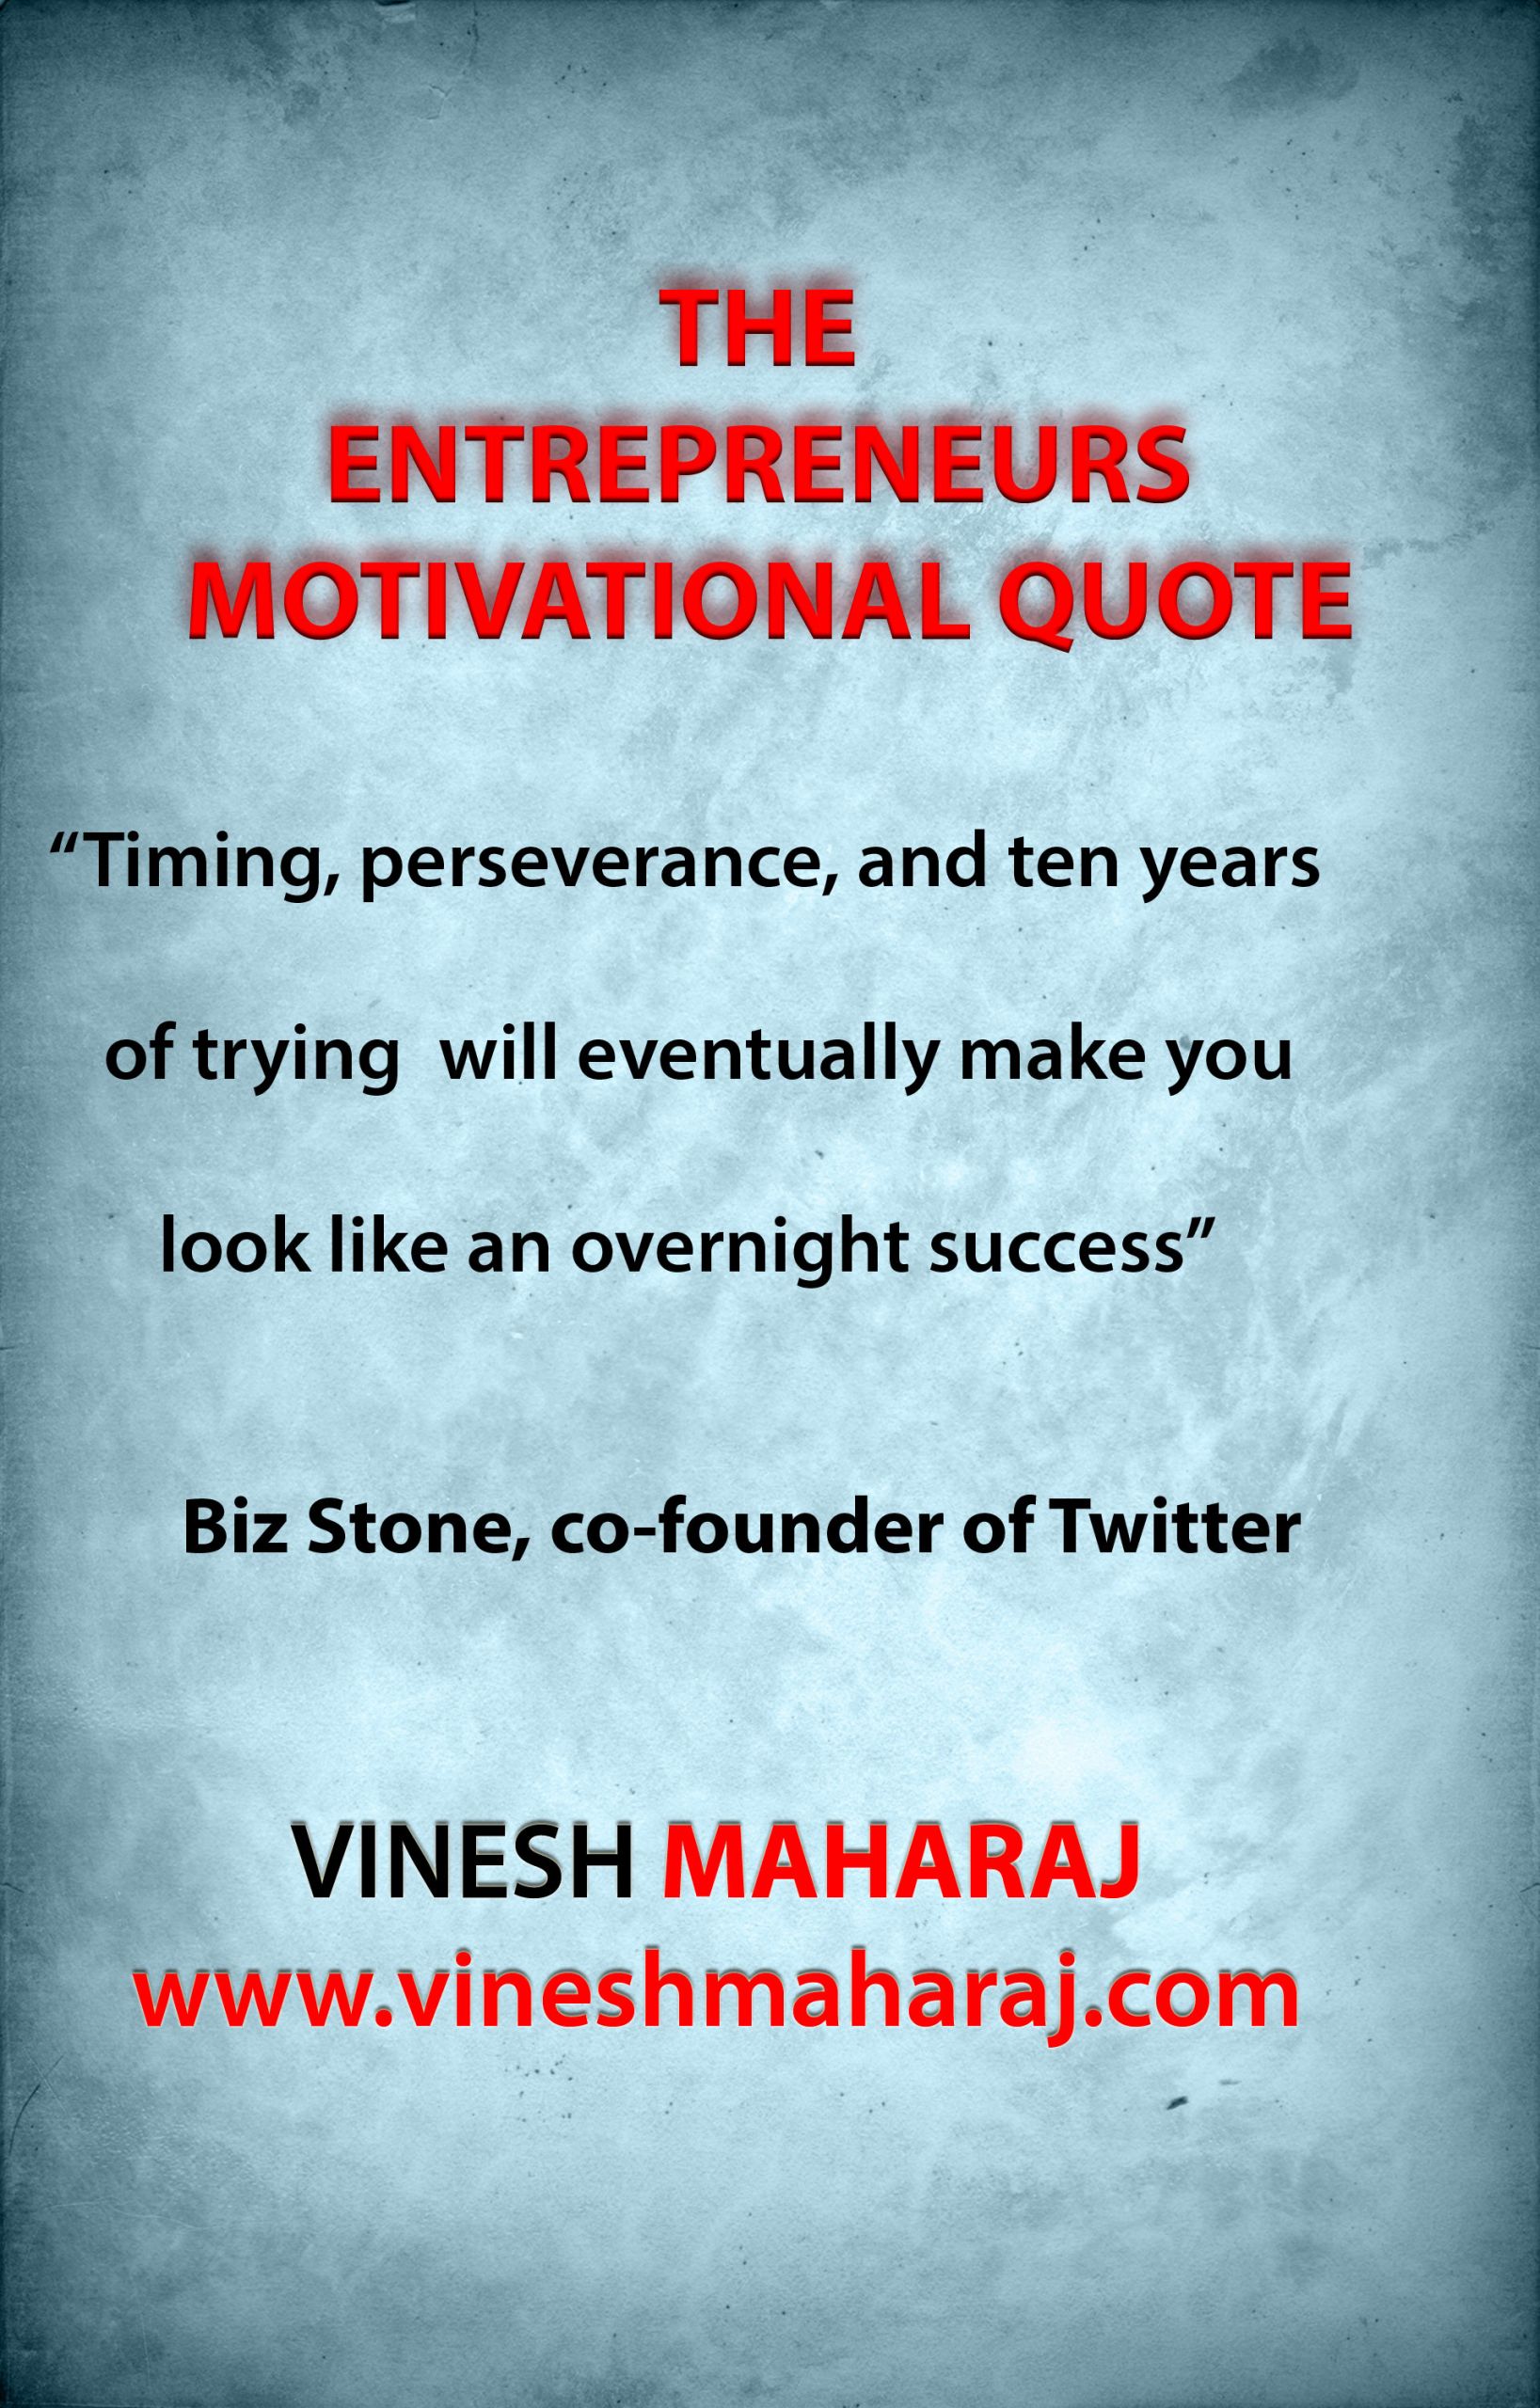 Motivational Quotes For Entrepreneurs
 THE ENTREPRENEURS MOTIVATIONAL QUOTE